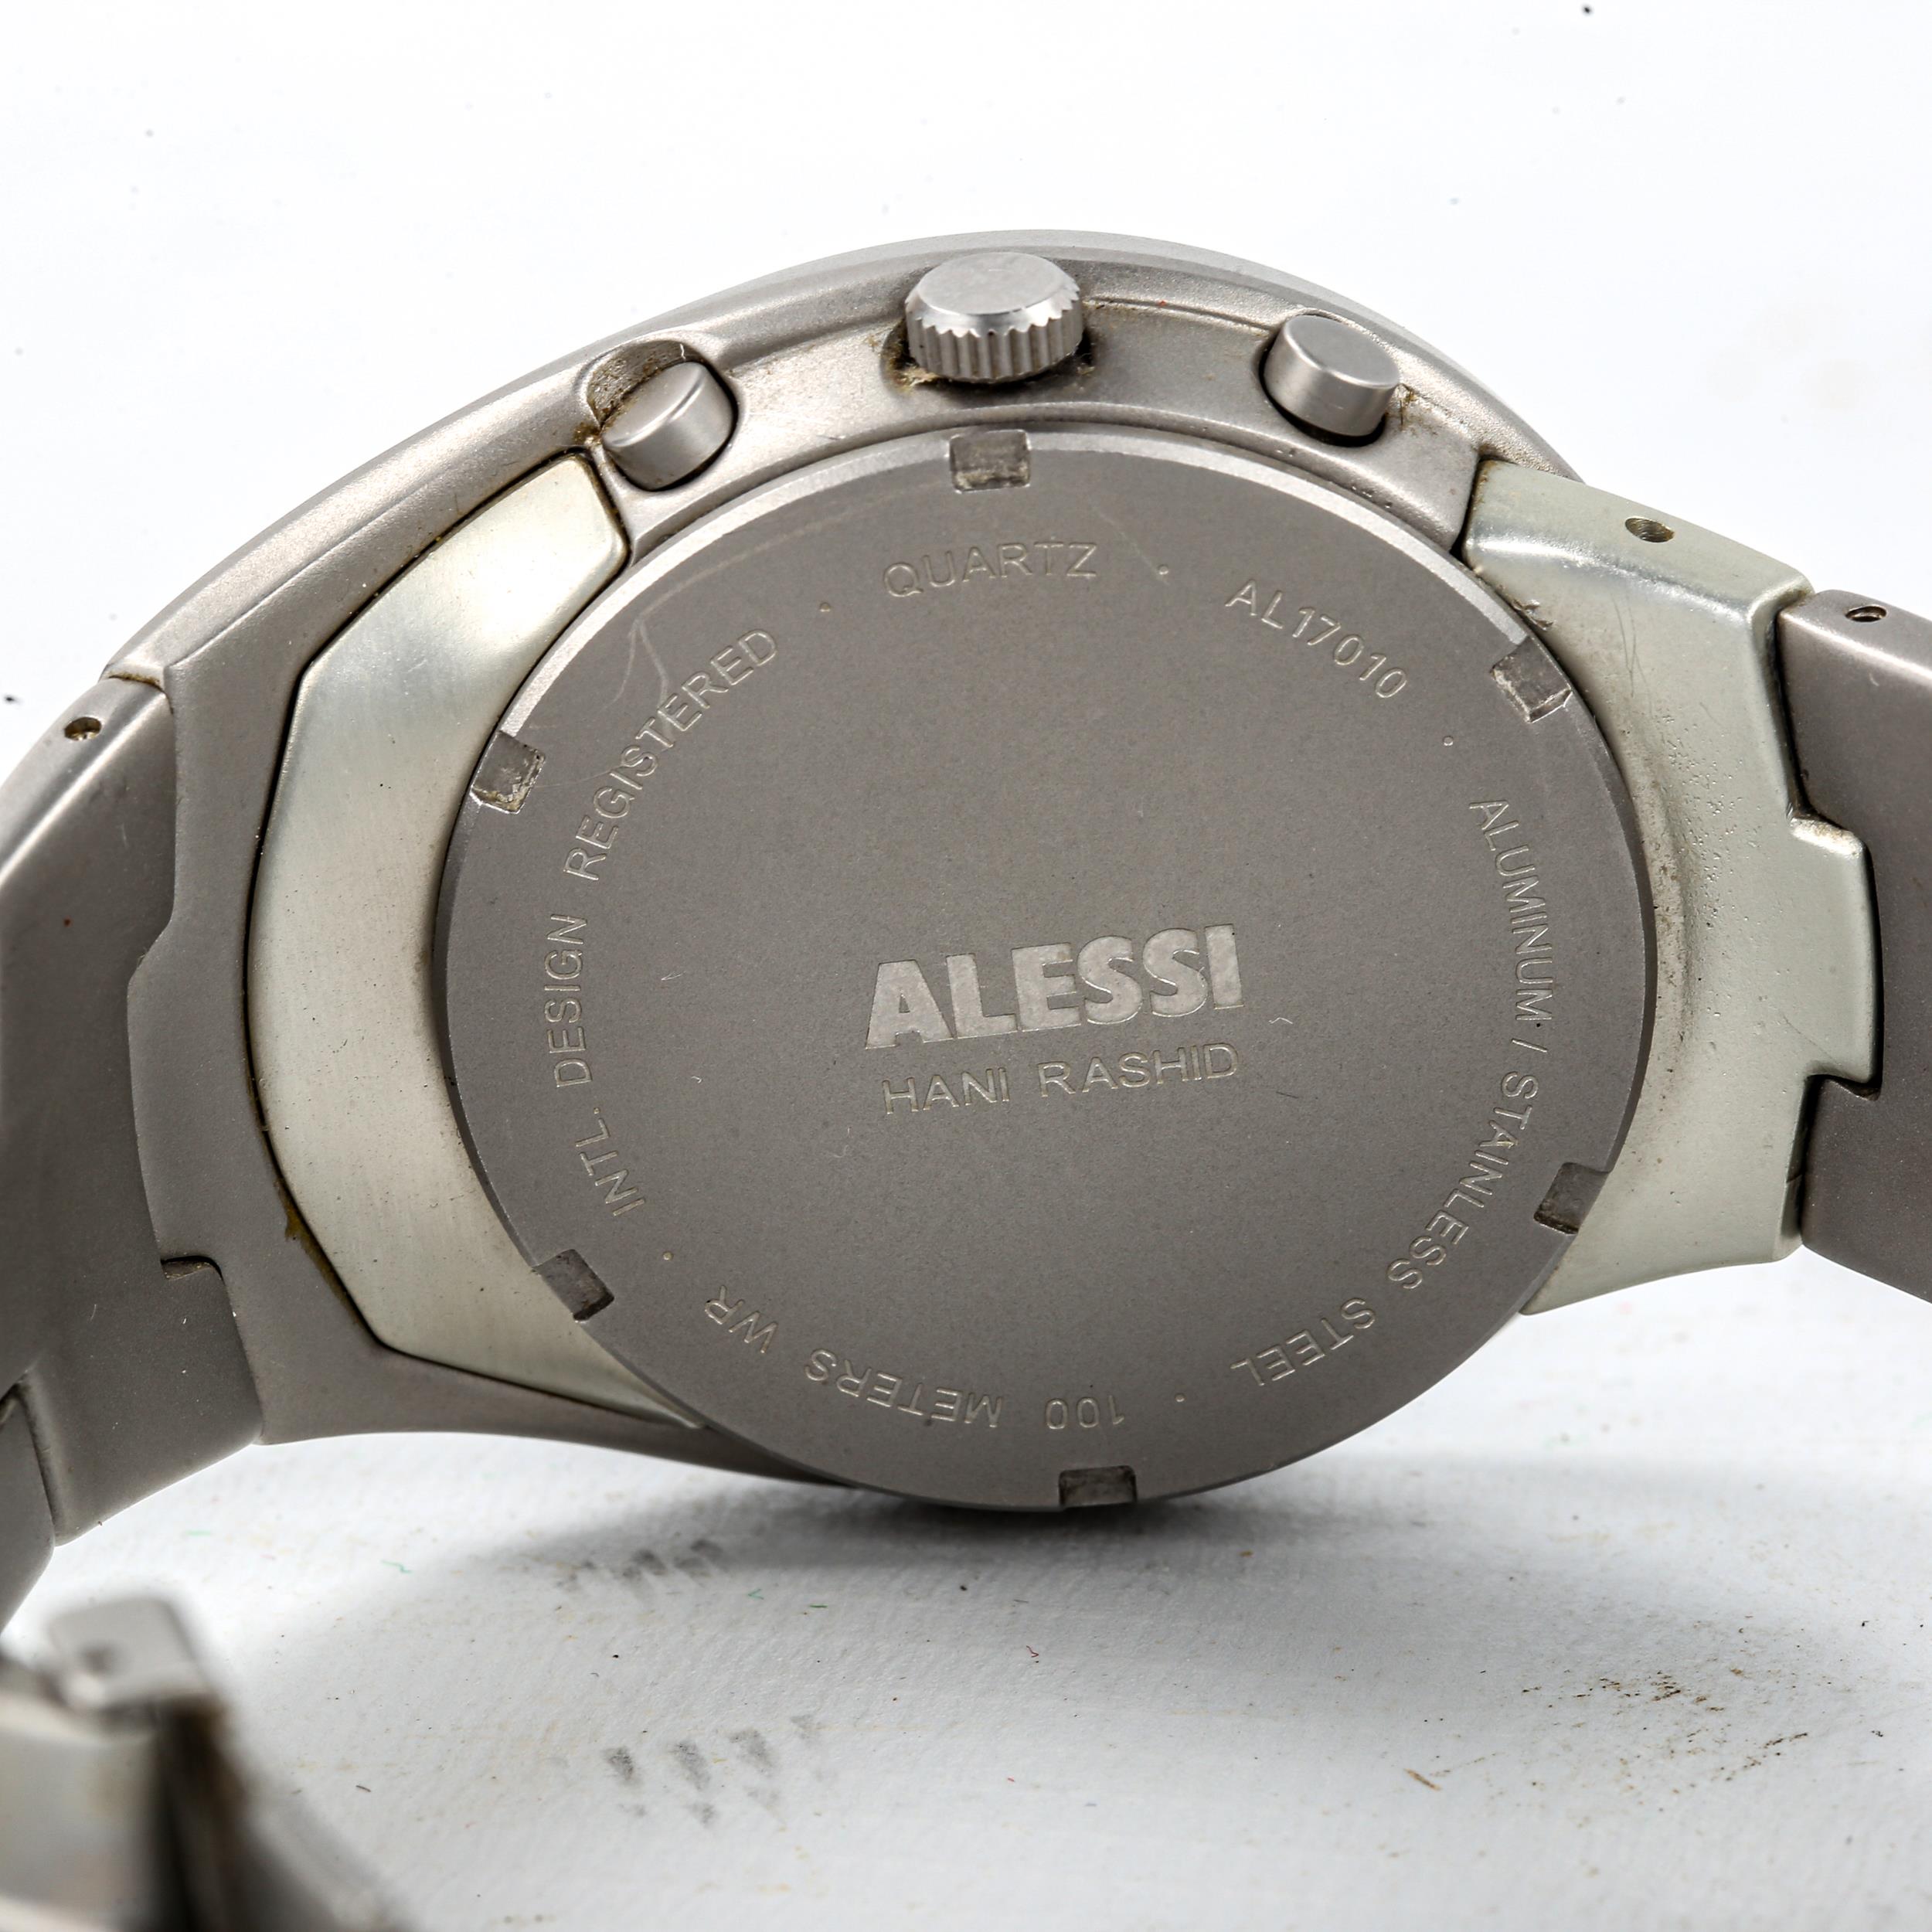 HANI RASHID for Alessi, a stainless steel bracelet chronograph watch Good working order, good - Image 4 of 4